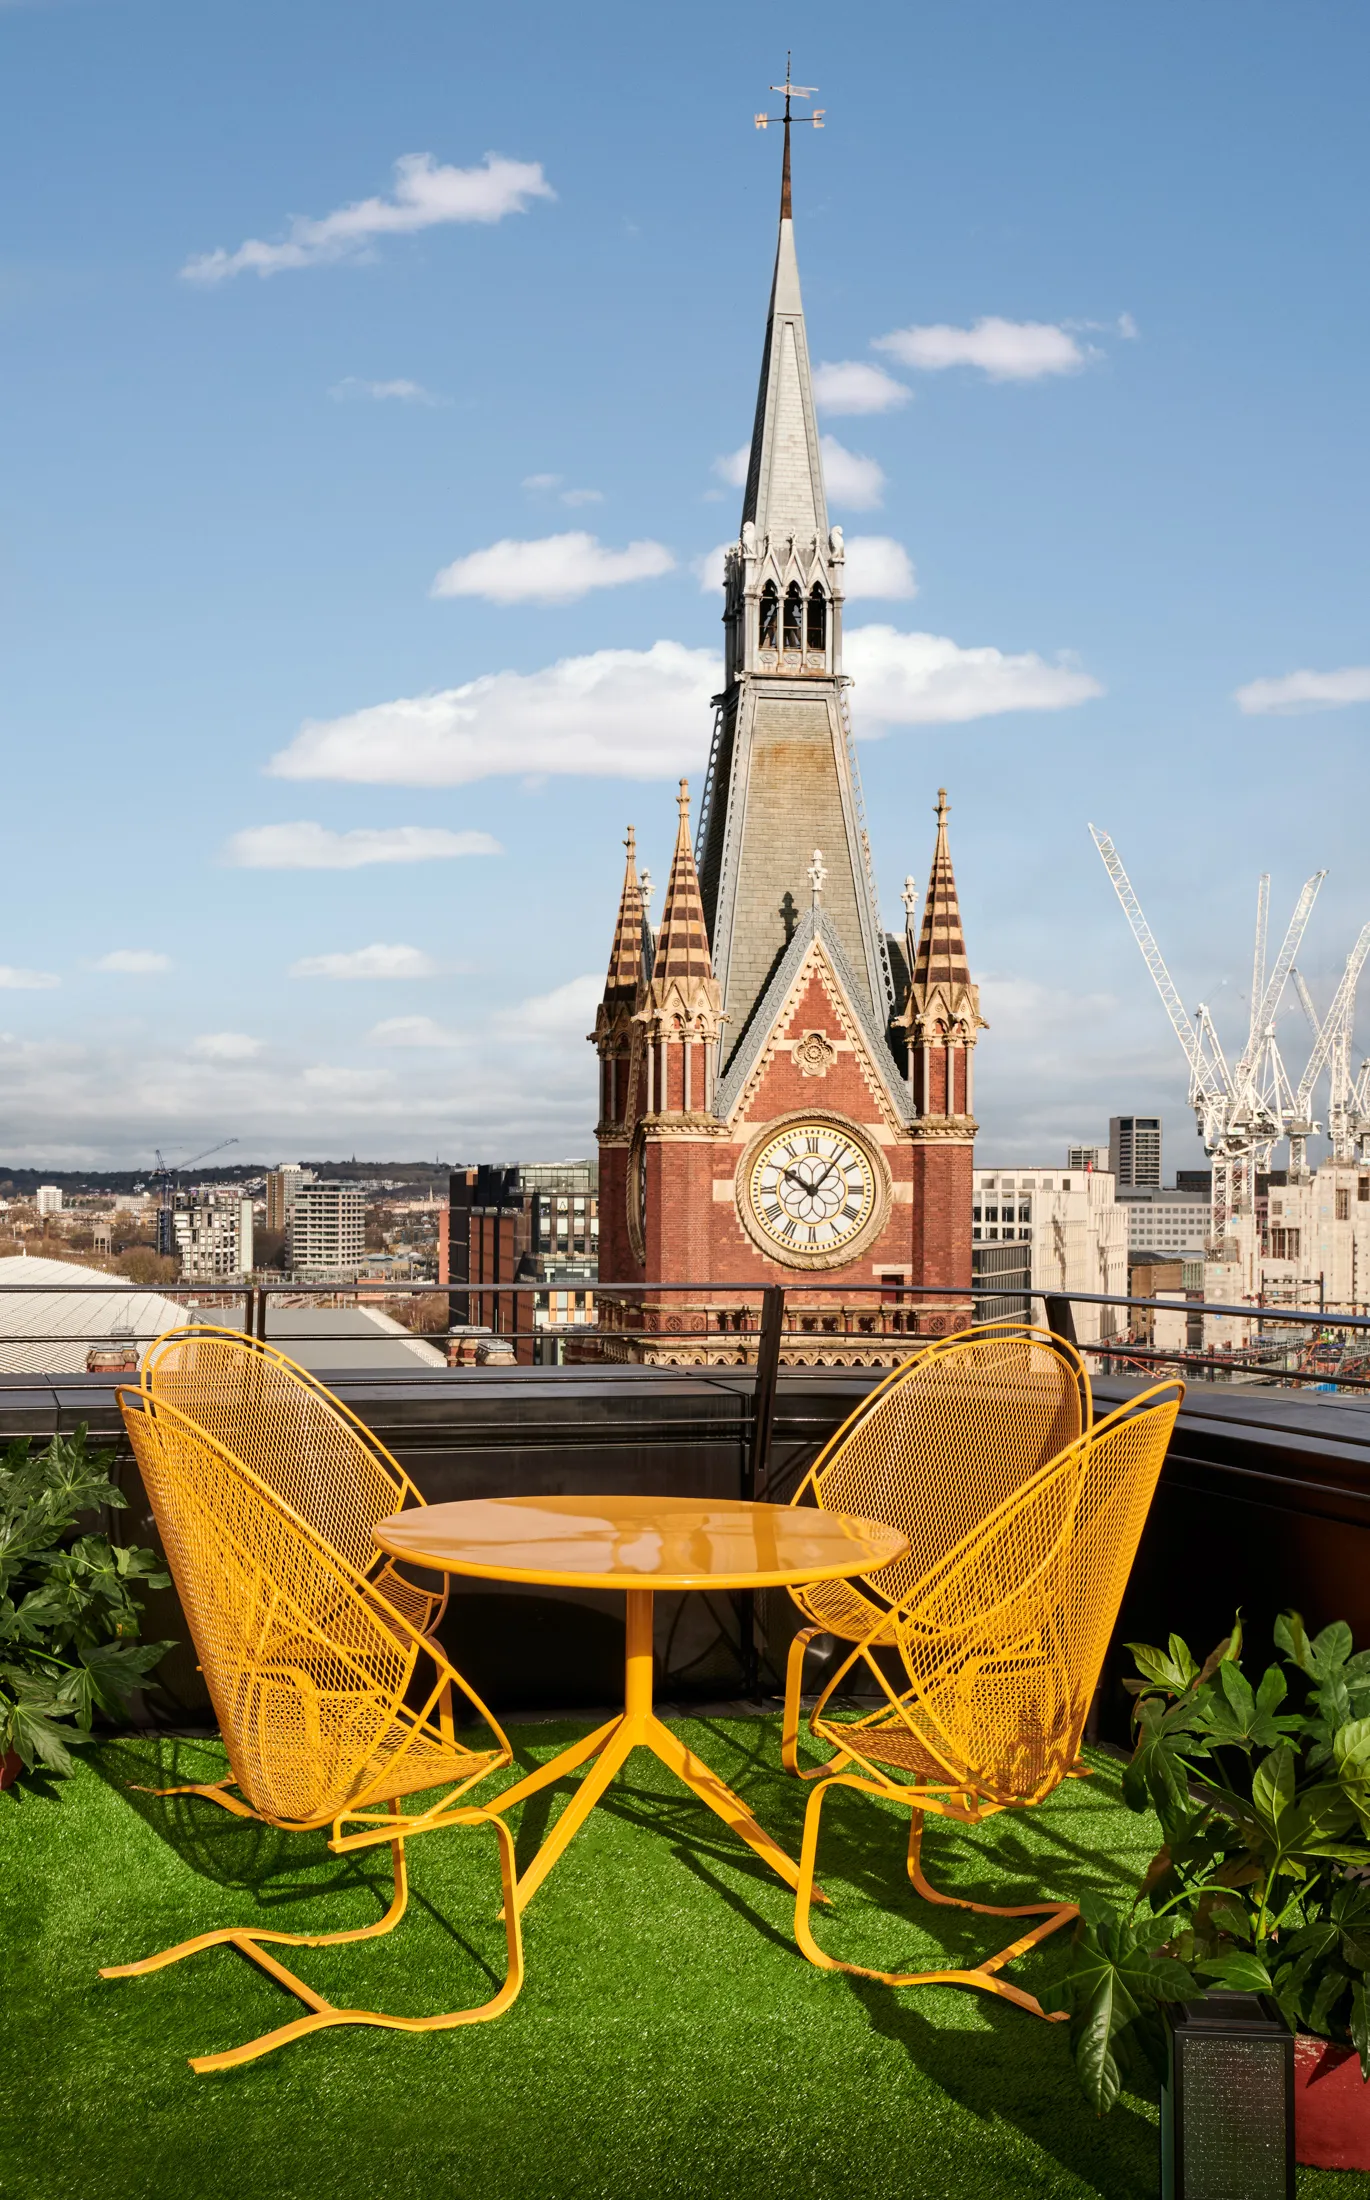 4. Take to London's rooftops